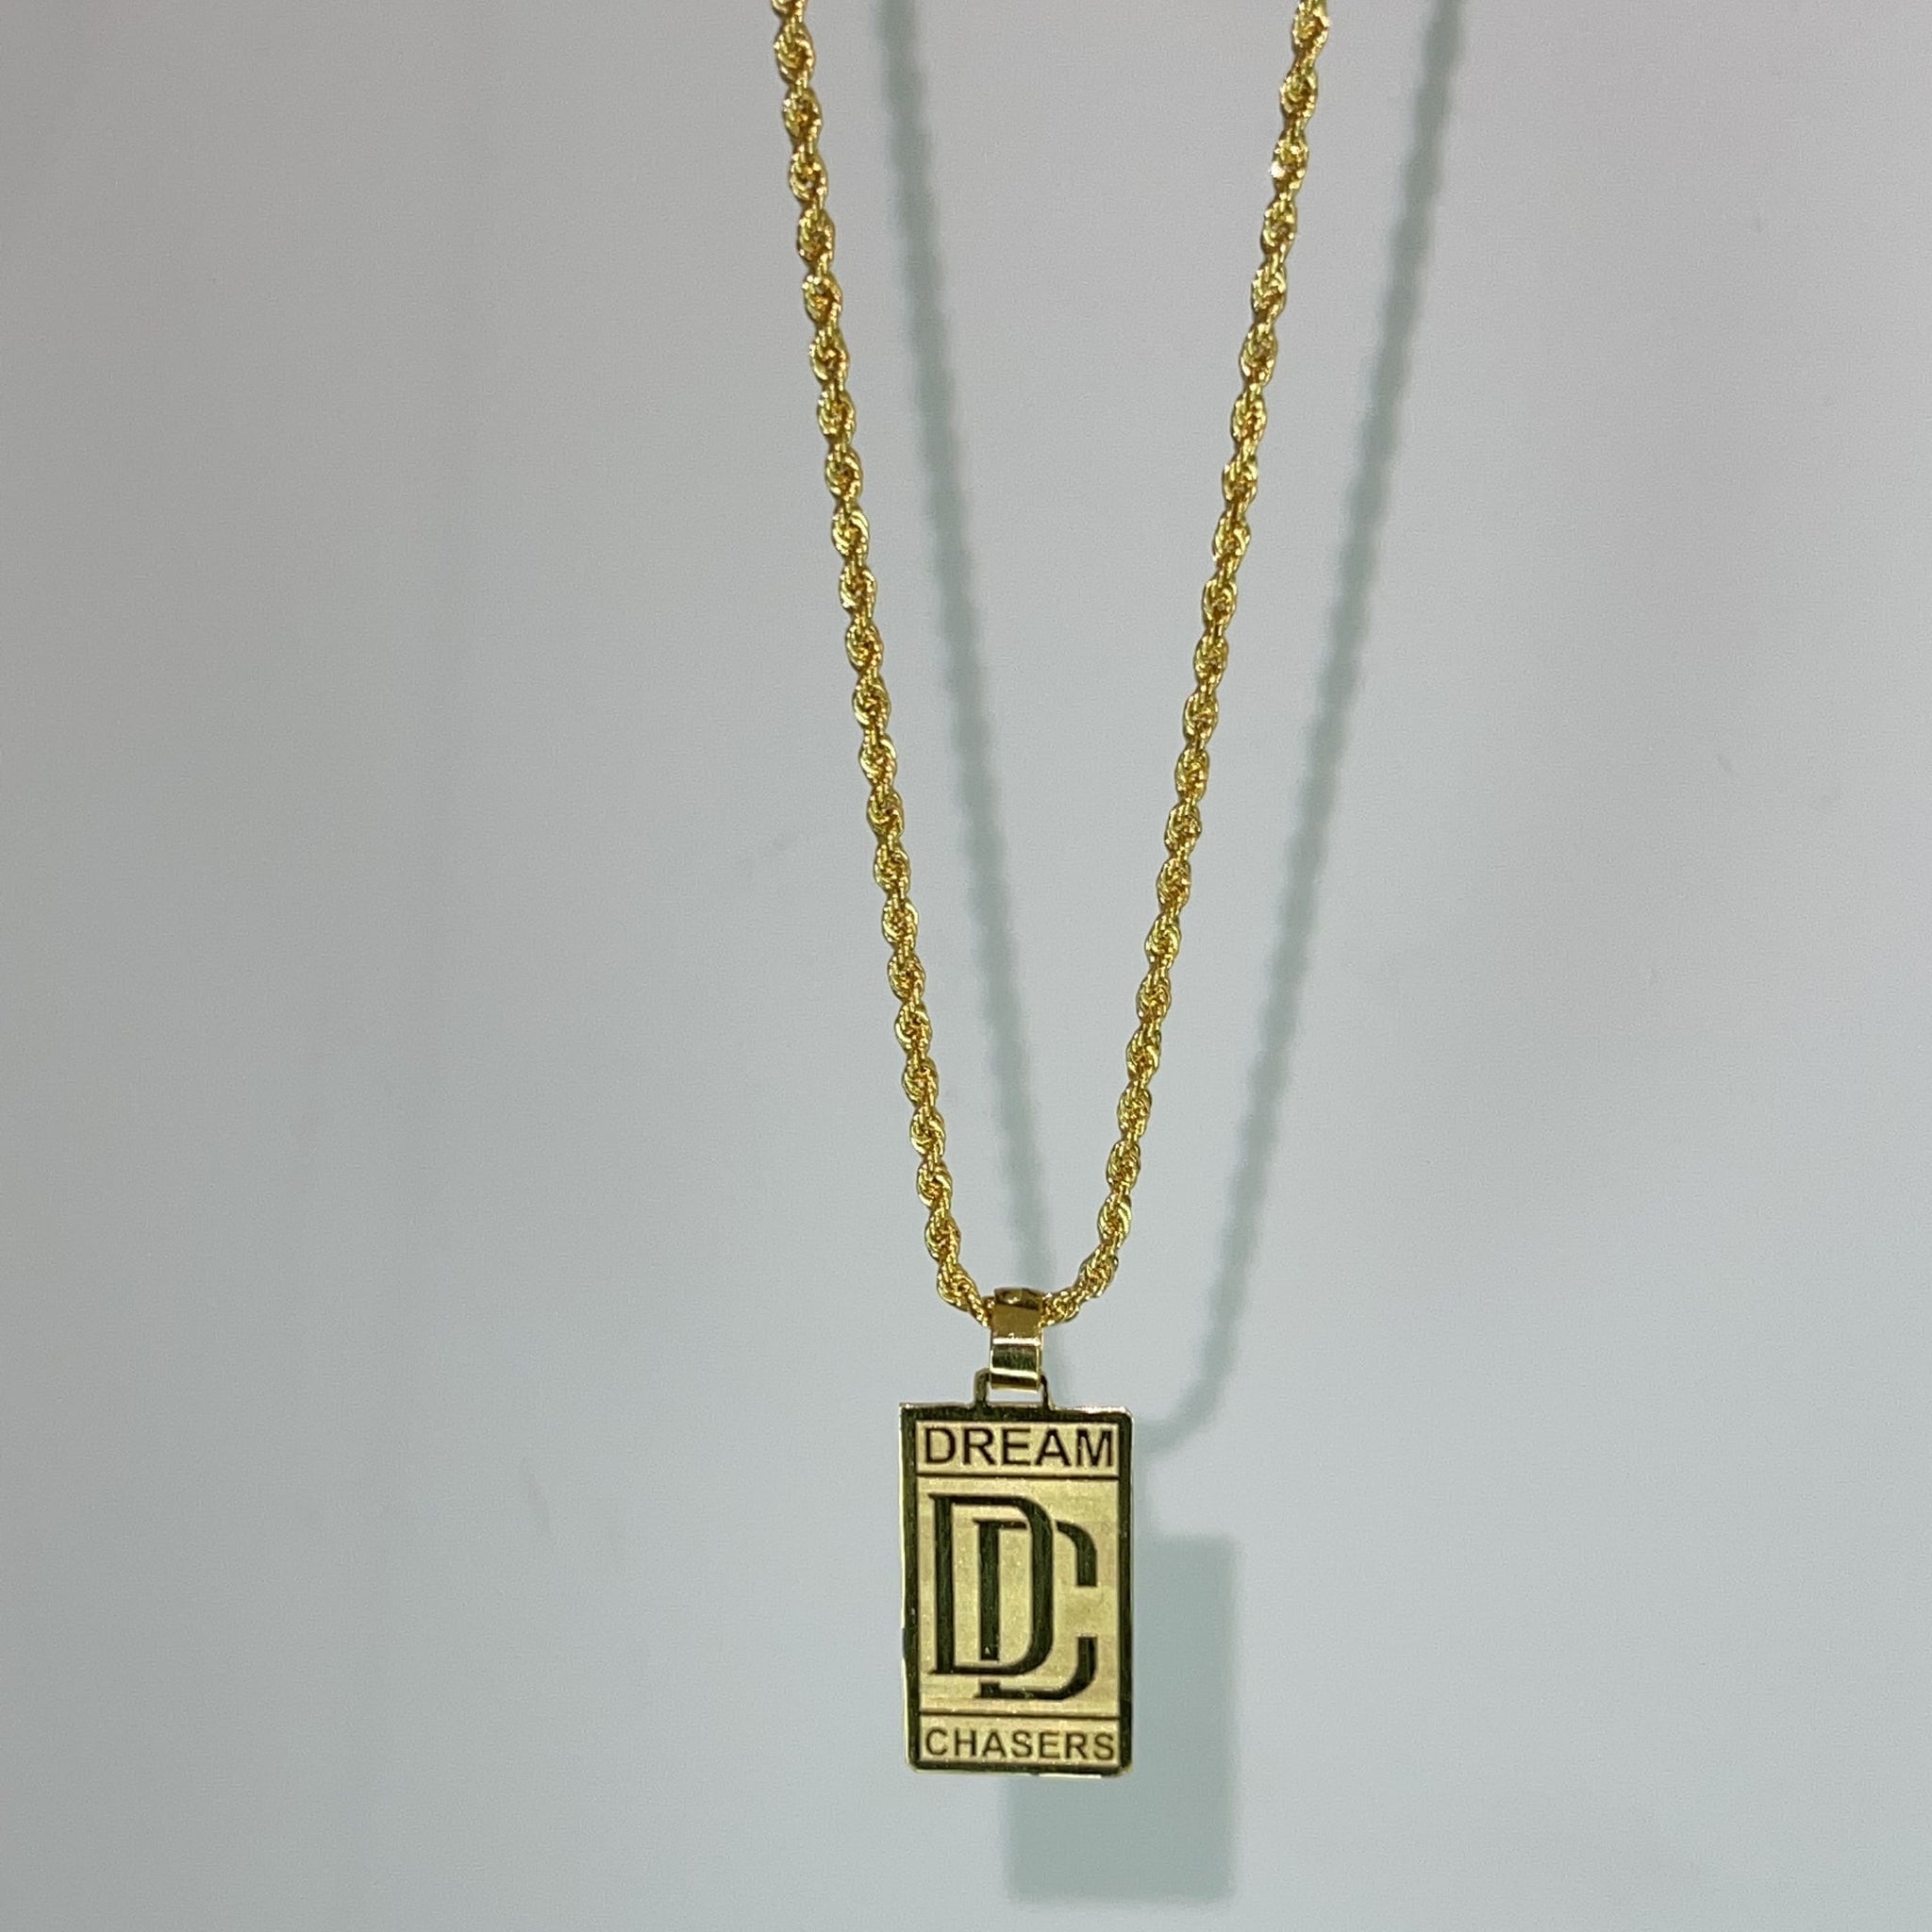 Rope chain + Dream Chasers pendant - 14 carat gold - 55cm / 2.2mm